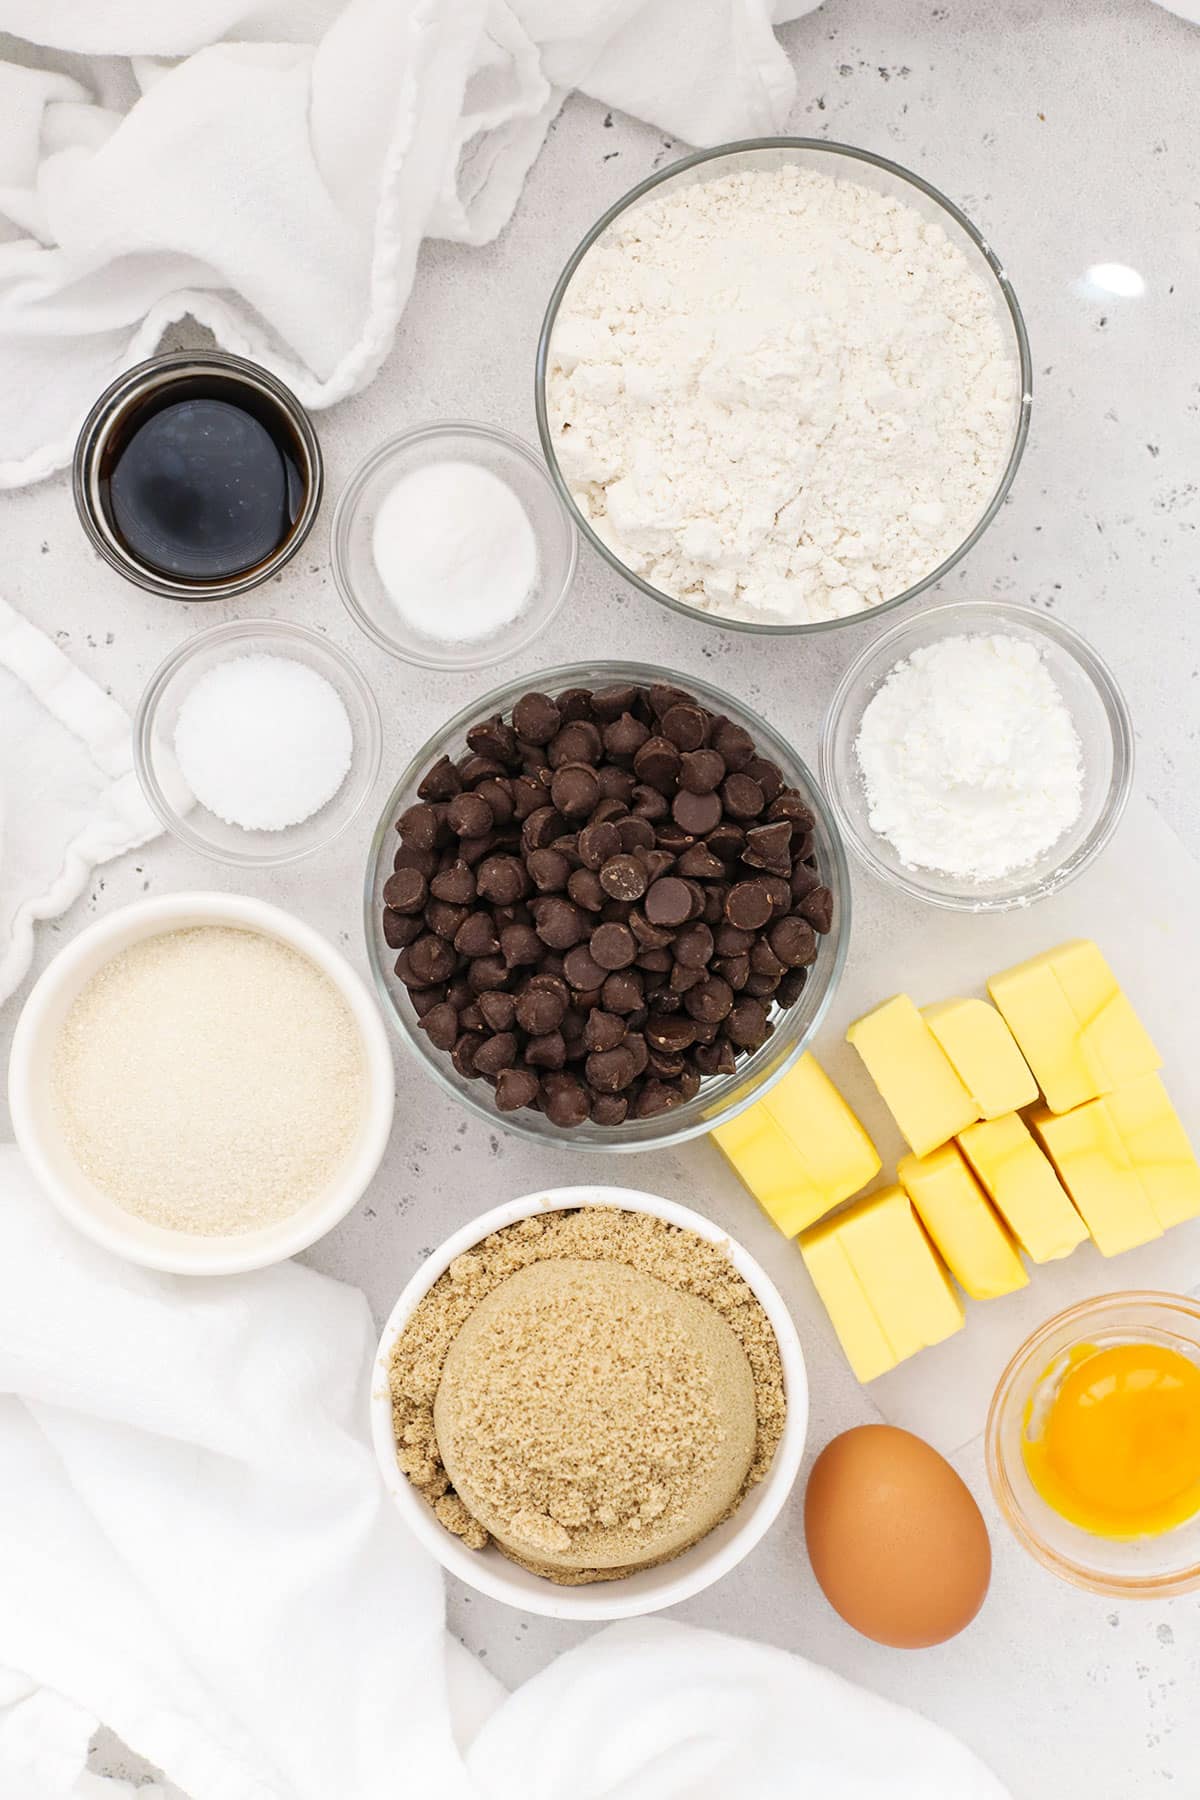 Ingredients for gluten-free chocolate chip cookie bars